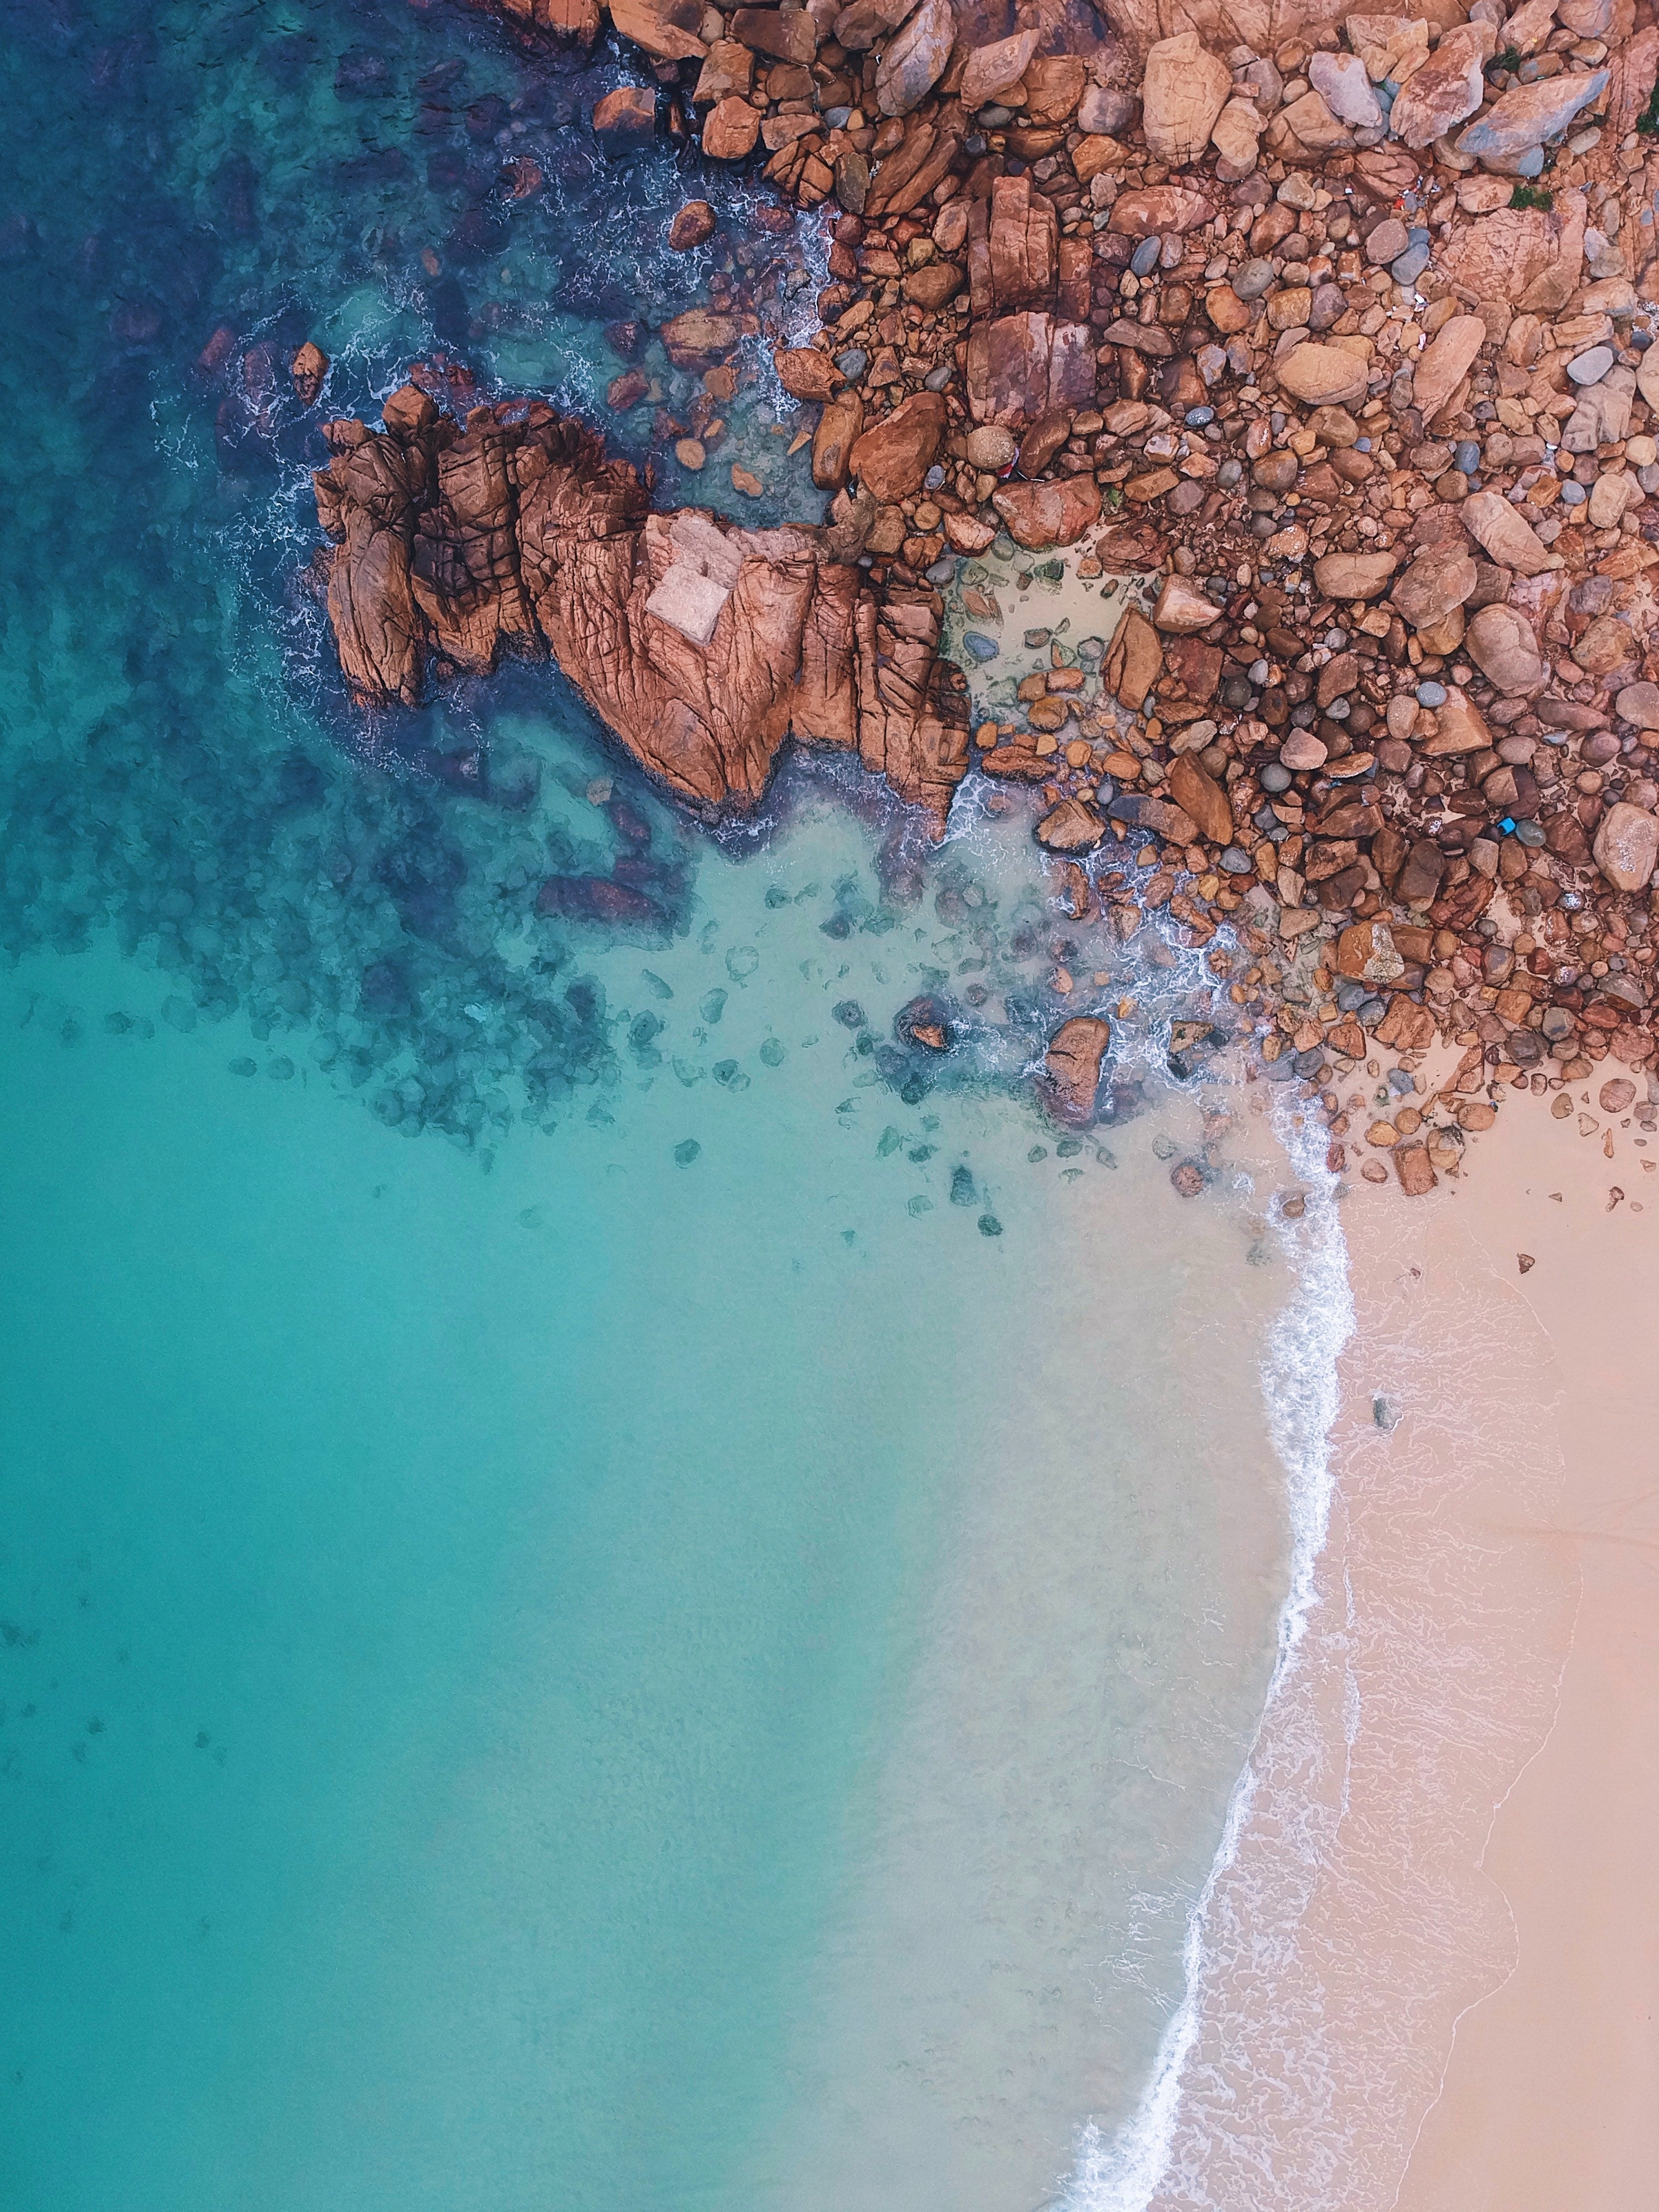 sand, view from above, stones, nature, water, ocean 32K